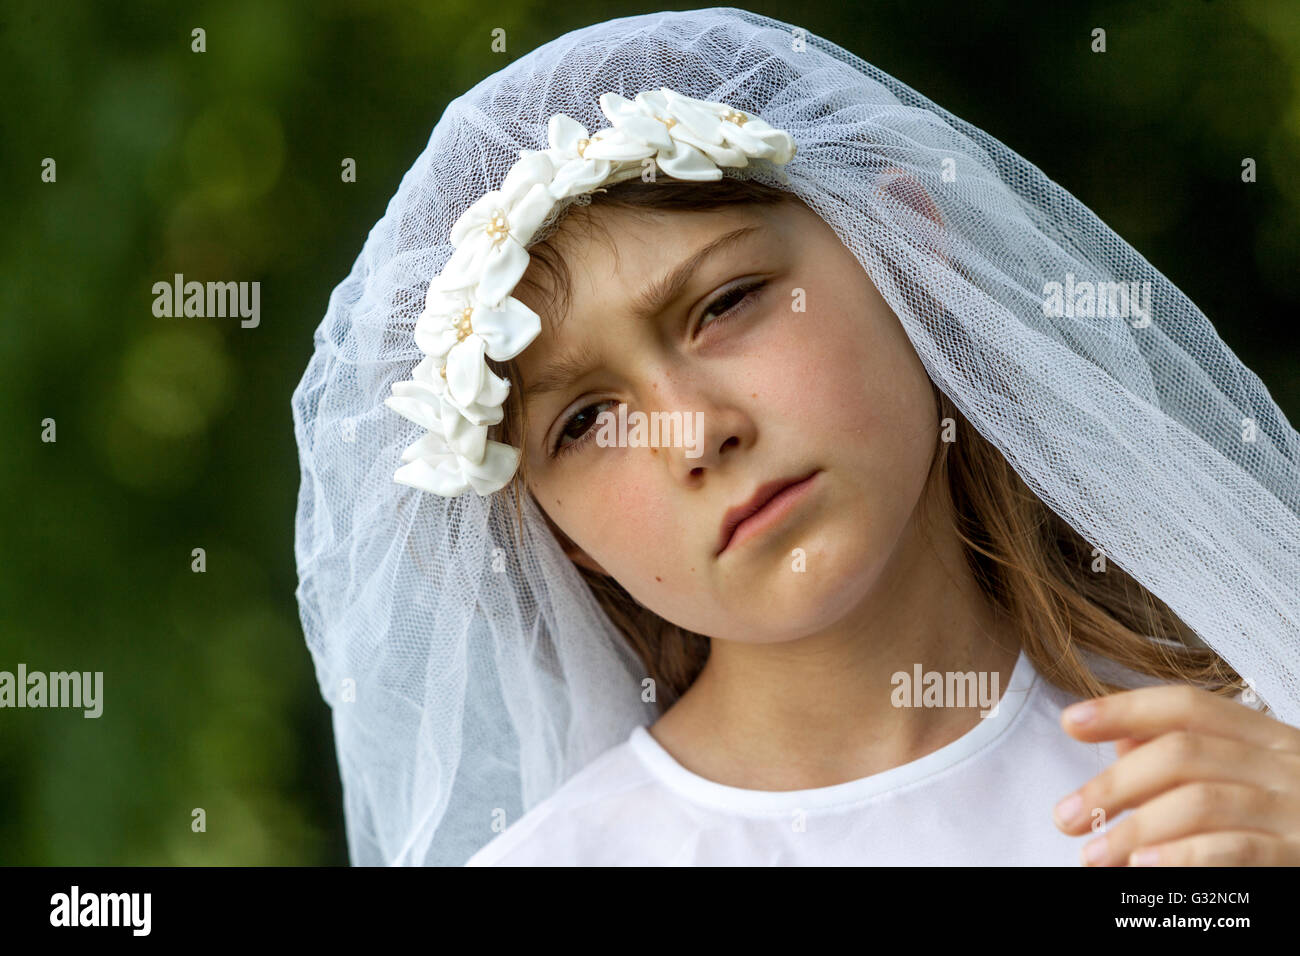 Age of Innocence 6-7 Years Old Girl White Bridal Veil Bride Game Child Face Sad Expression Sad Girl Outside Stock Photo